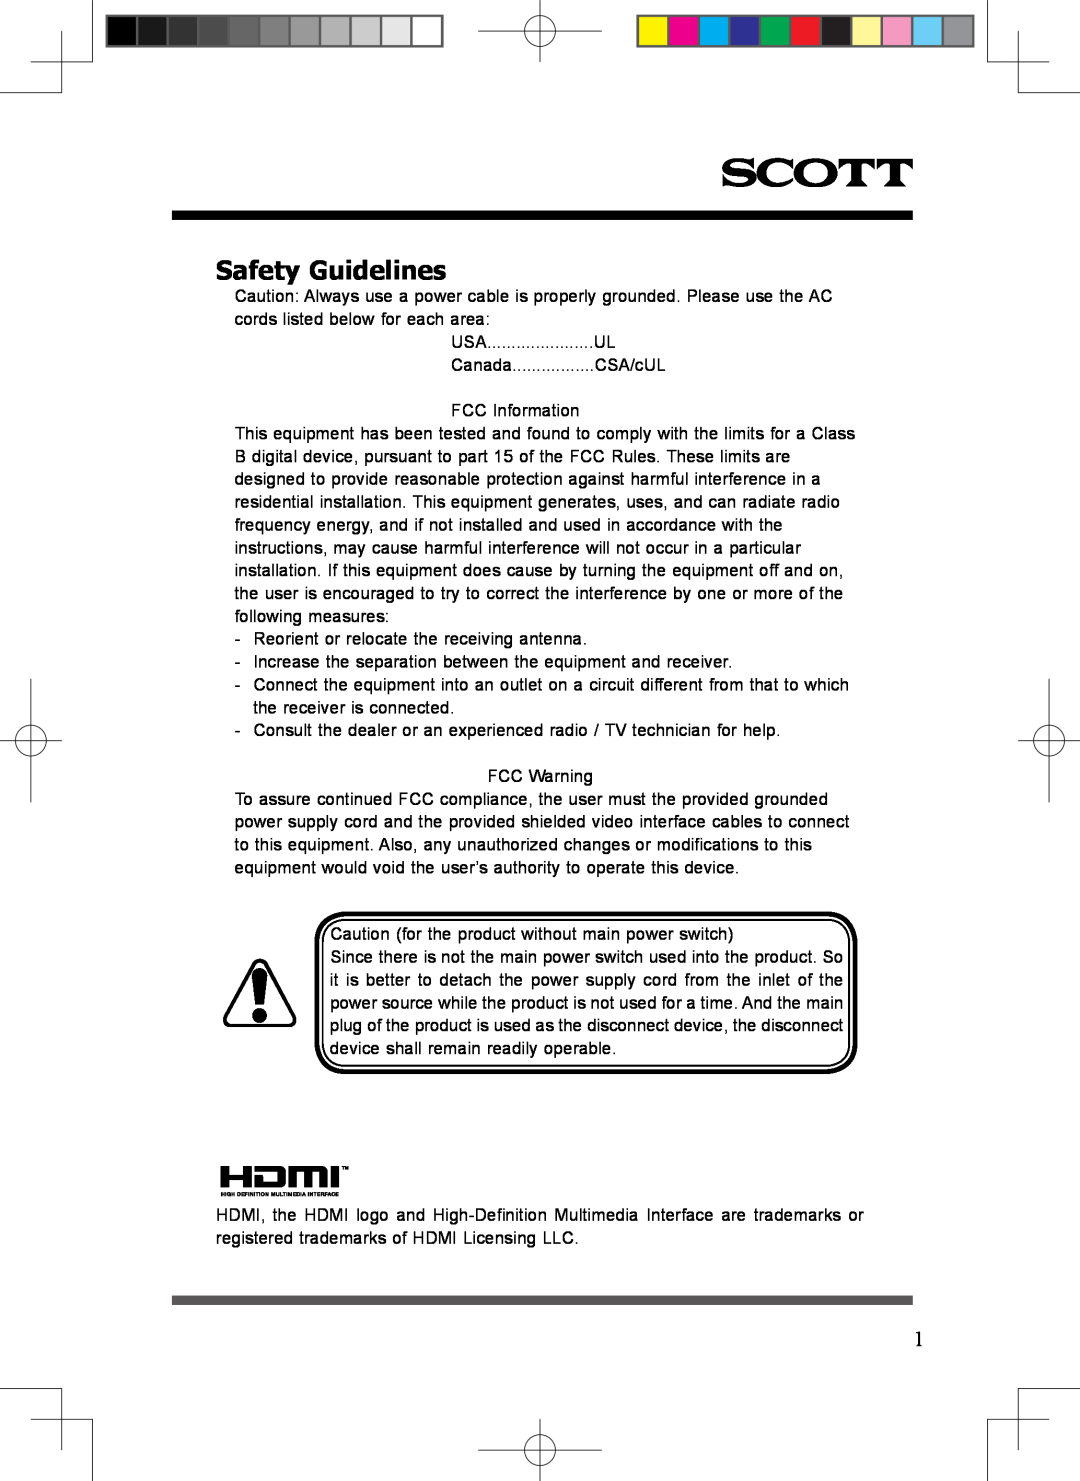 Scott LCT37SHA manual Safety Guidelines 